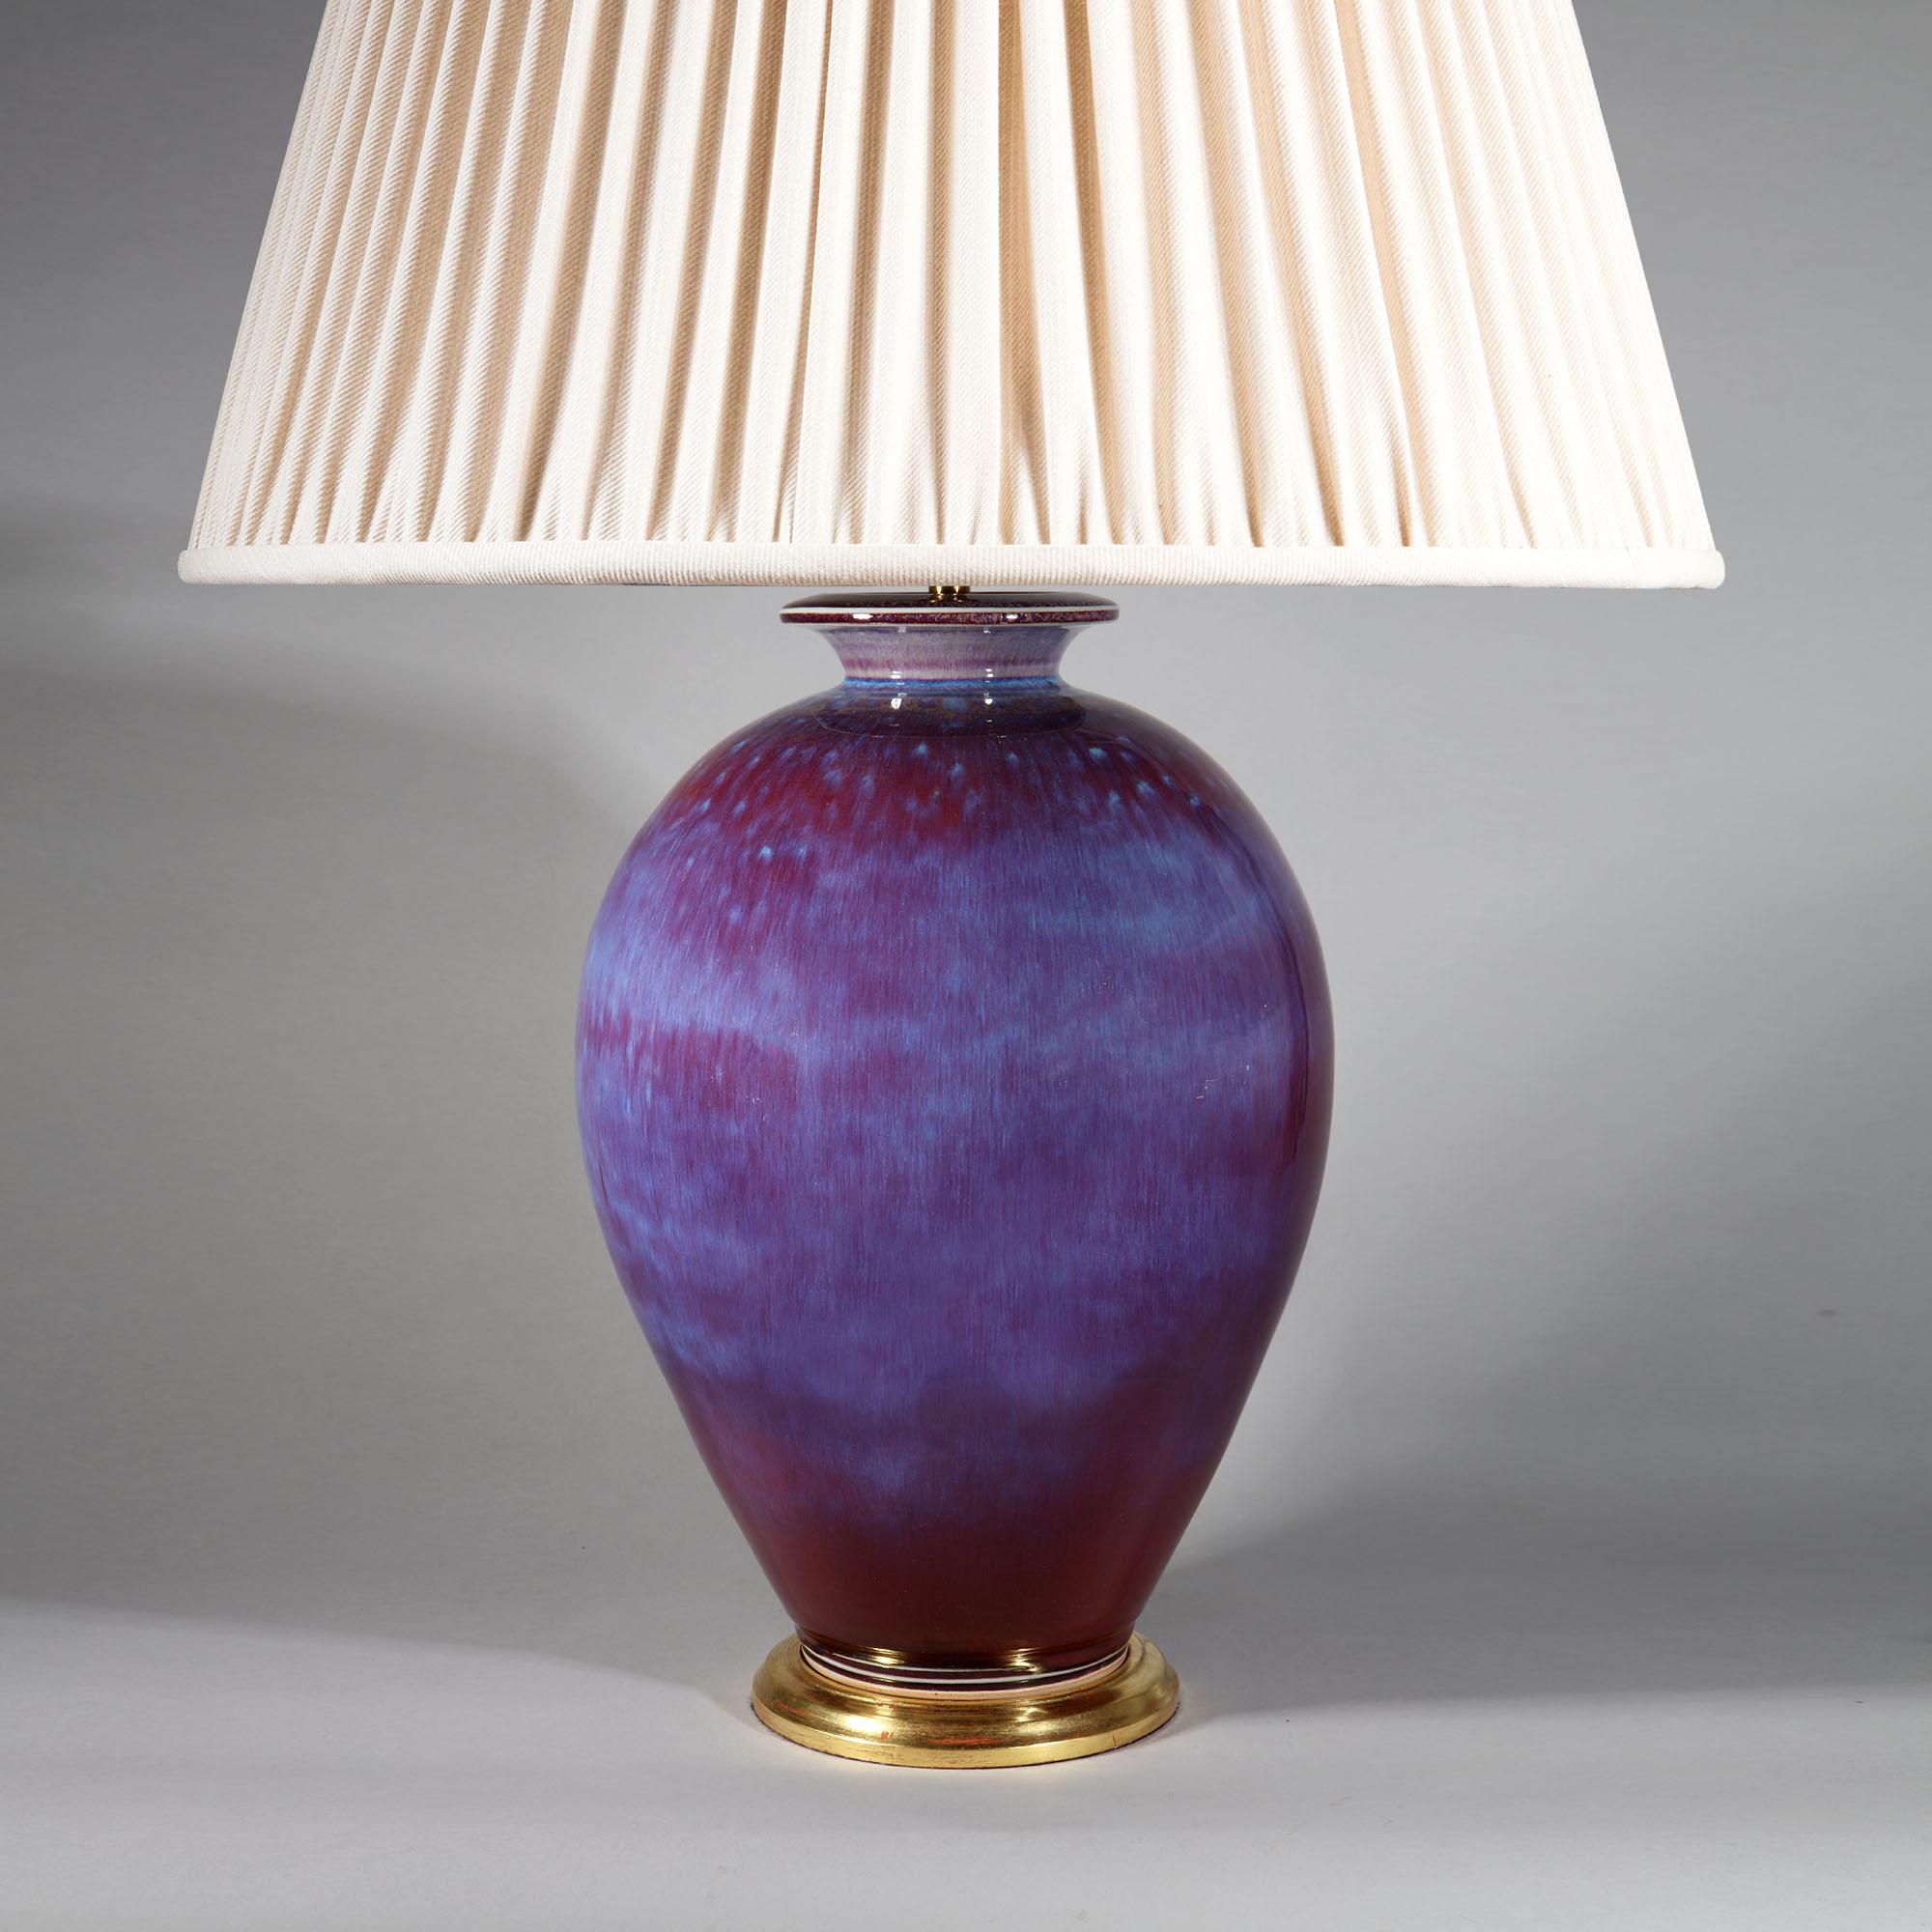 The voluptuous body of the vase of bulbous form, rising to broad shoulders and a short flared neck. The vase is covered in a stunning and complex vitreous oxblood red glaze, with areas of transmutation purple and blue (flambé). Now mounted on a